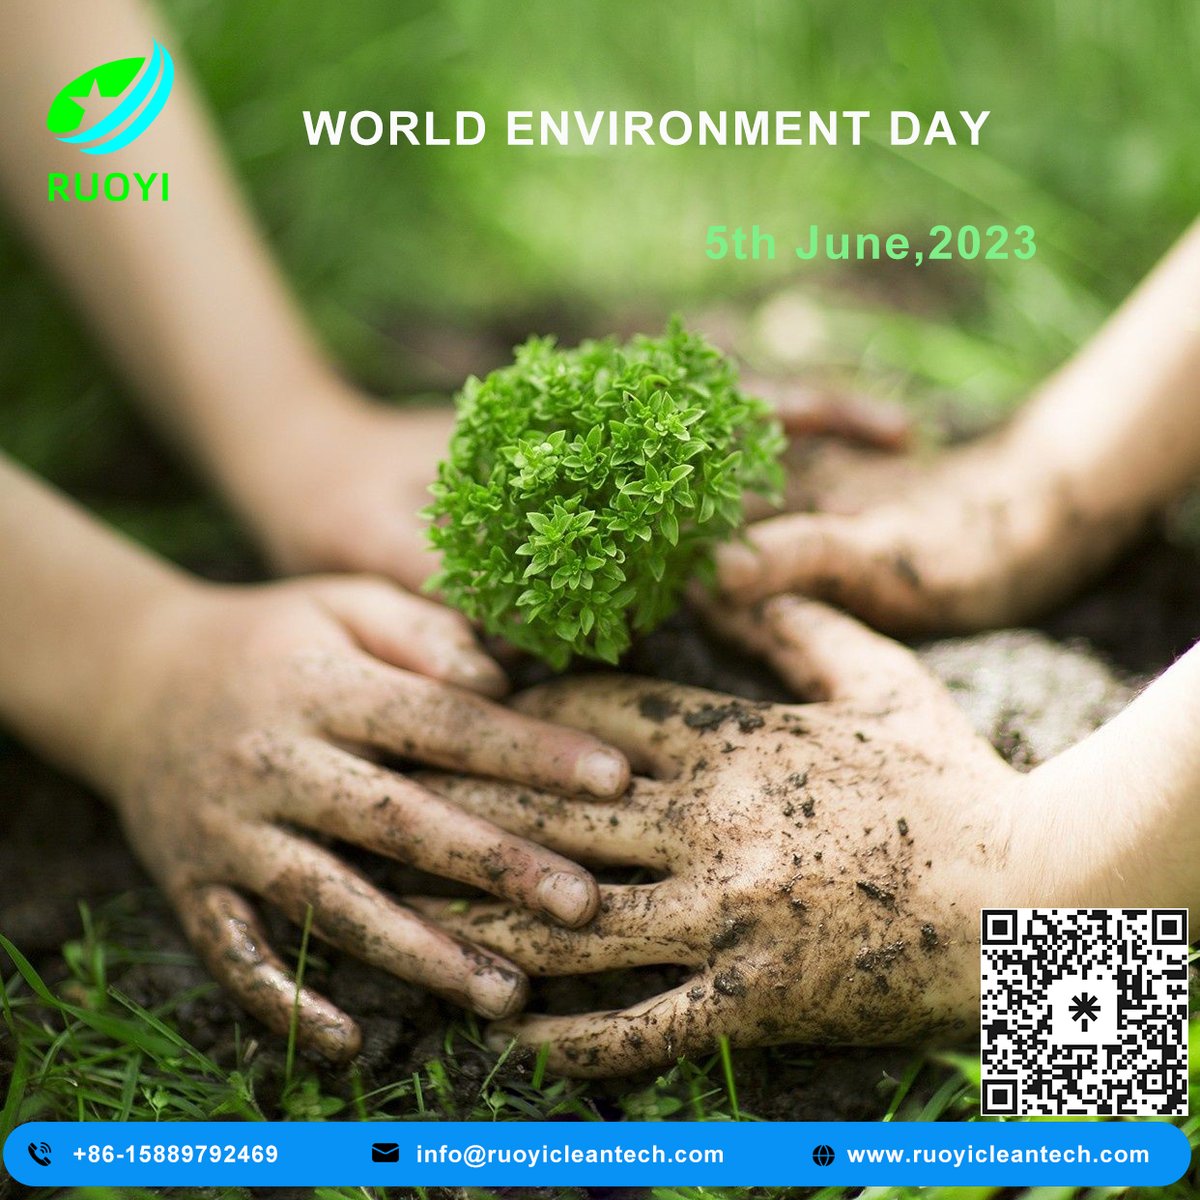 World Environment Day
#ruoyicleantech #WorldEnvironmentDay2023 #environment #EnvironmentDay #CleanAir
#cleanroom #CleanAirSolution #CleanroomEquipments #Cleanrooms #hepafilter #bagfilter #prefilter #passbox #Vbankfilter #weighingbooth #cleanbench #airshower #FFU